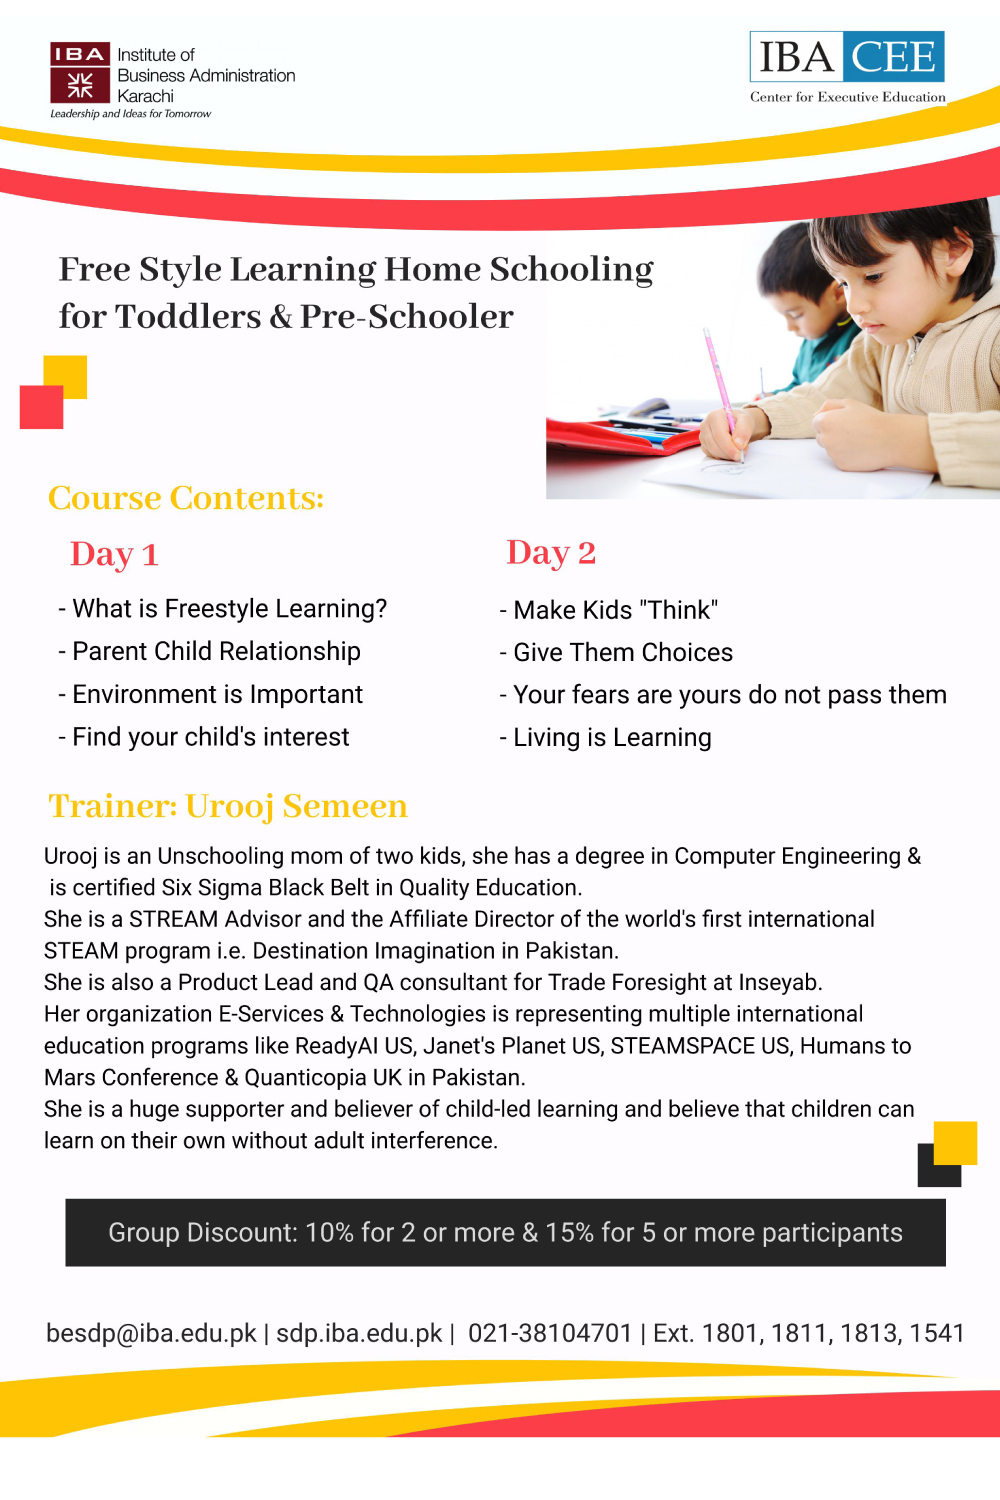 Free Style Learning Home Schooling for Toddlers & Pre-Schooler